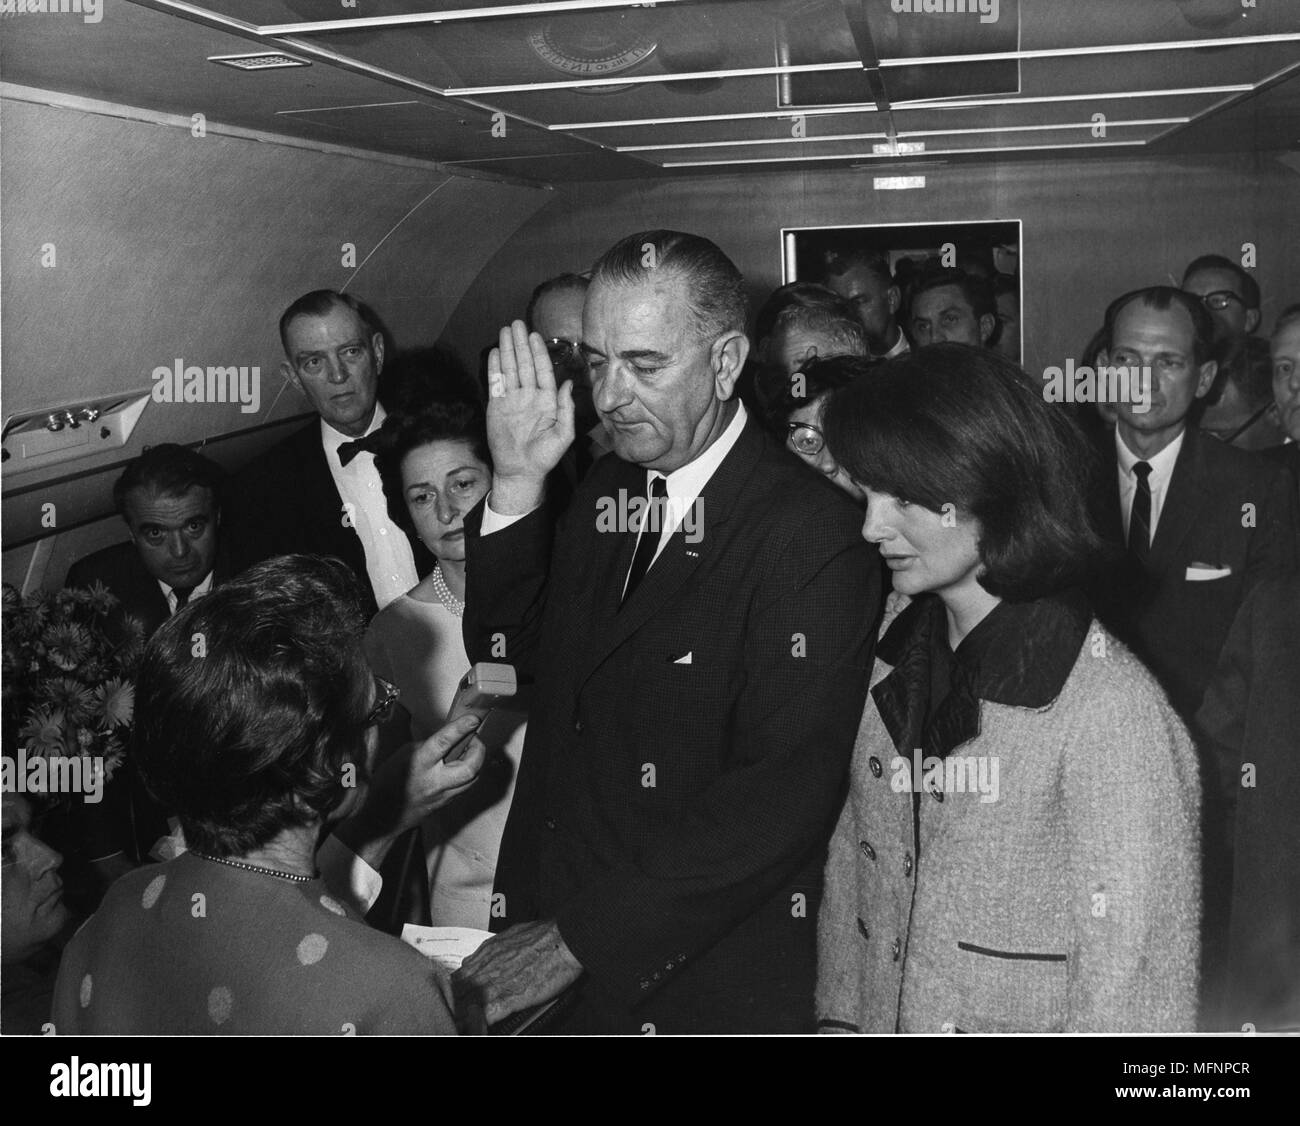 Swearing in of Lyndon Baines Johnson (1908-1973) as 36th President of the United States, 22 November 1963. The ceremony took place on Air Force One, Love Field, Dallas, Texas.  At his side is Jackie Kennedy, widow of the assassinated president, John F Kennedy. LBJ Library, photo by Cecil Stoughton. Stock Photo